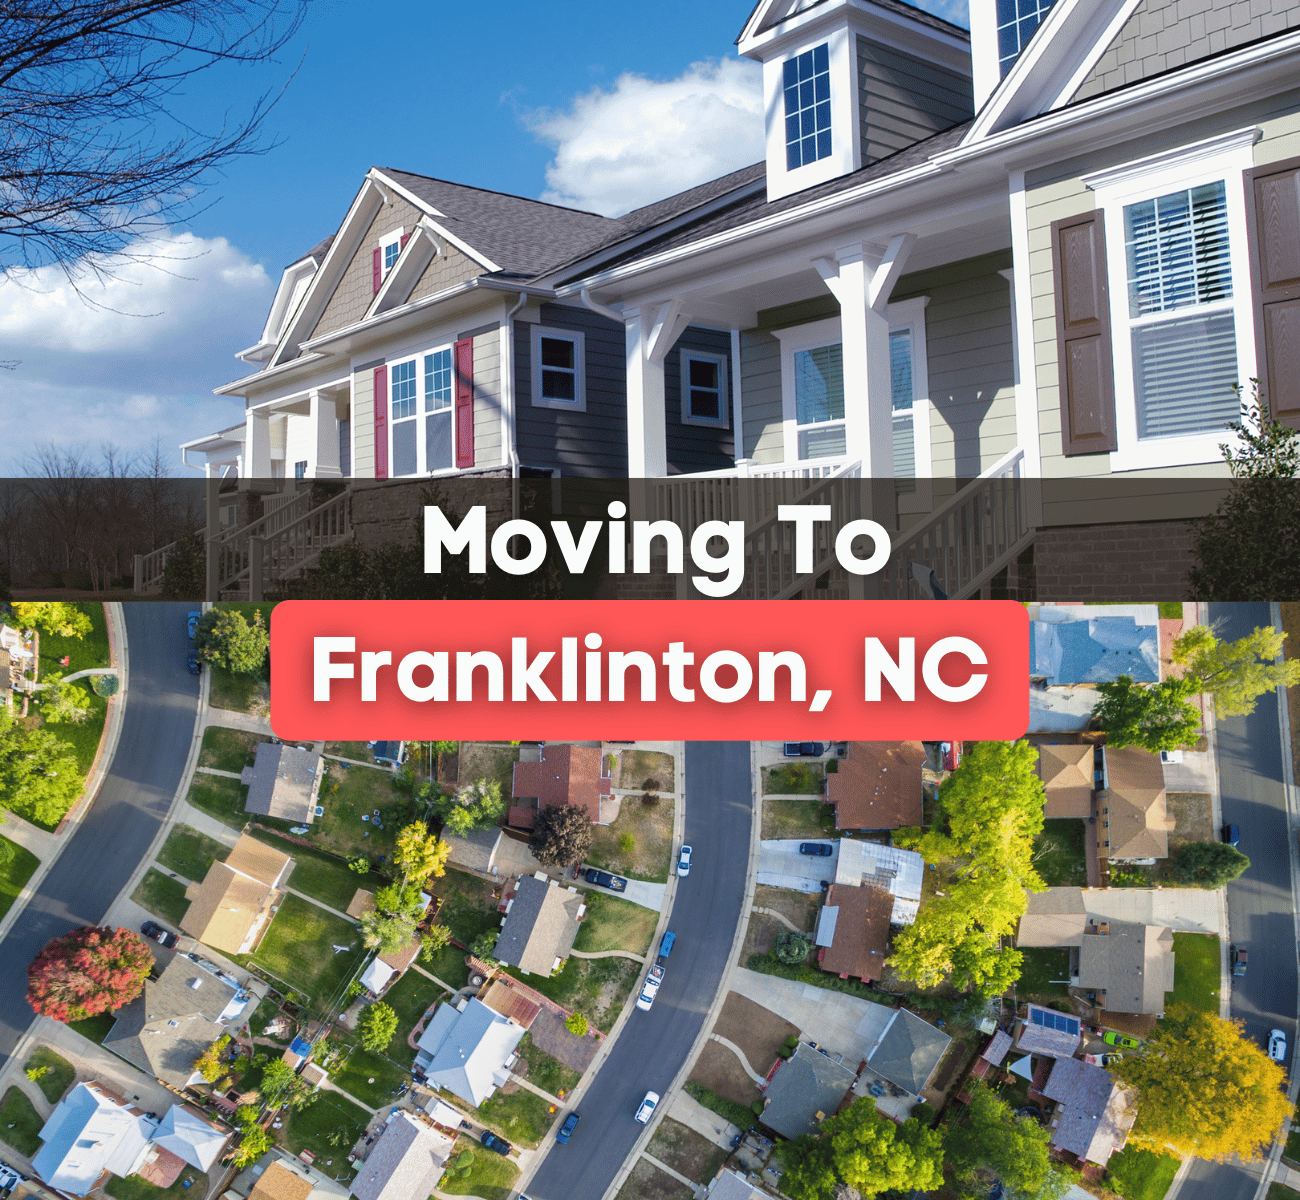 7 Things to Know BEFORE Moving To Franklinton, NC